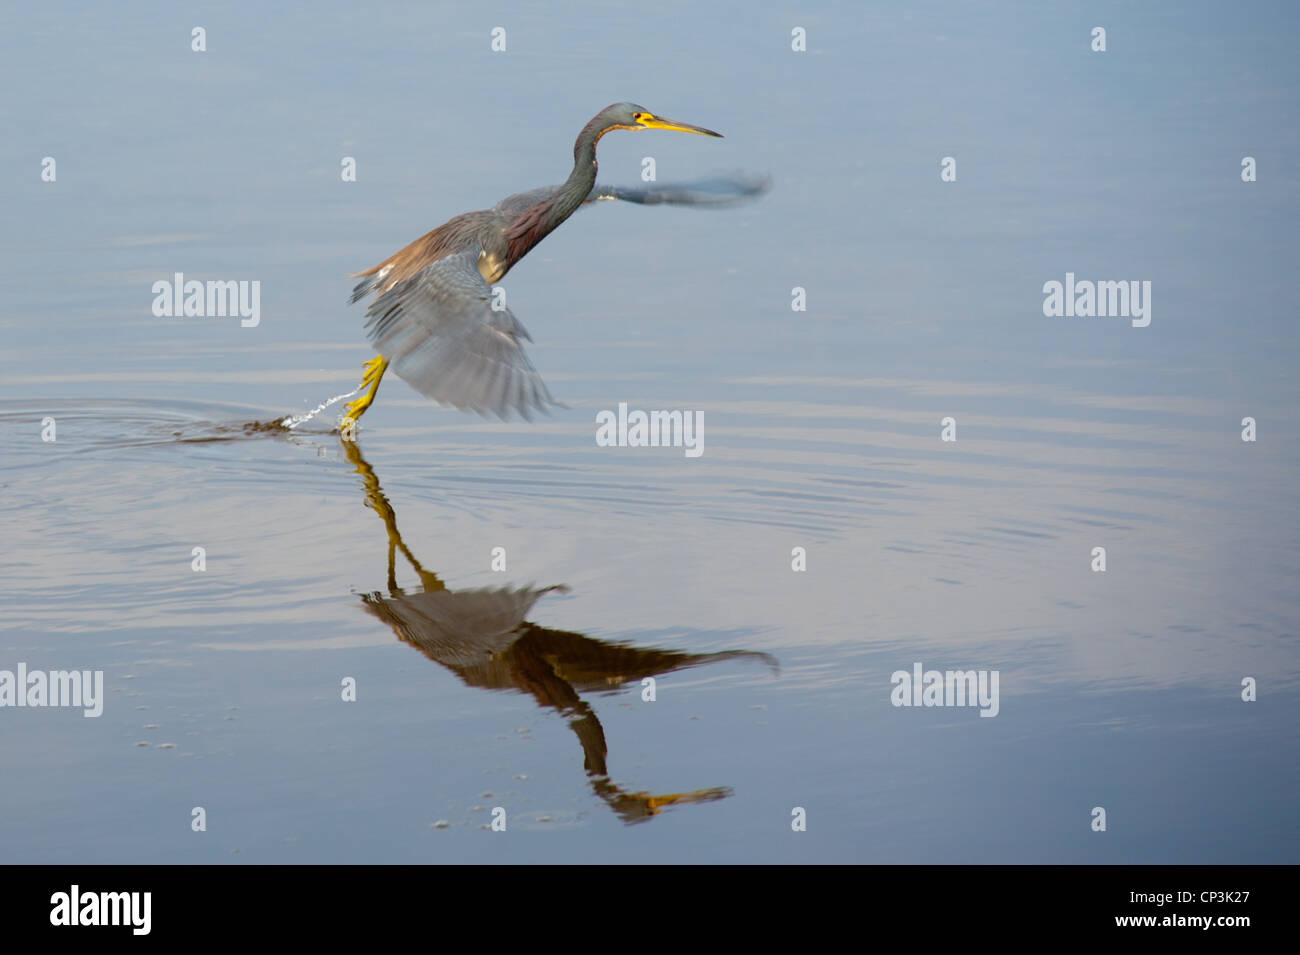 Heron takes off in flight from water of wetlands Stock Photo